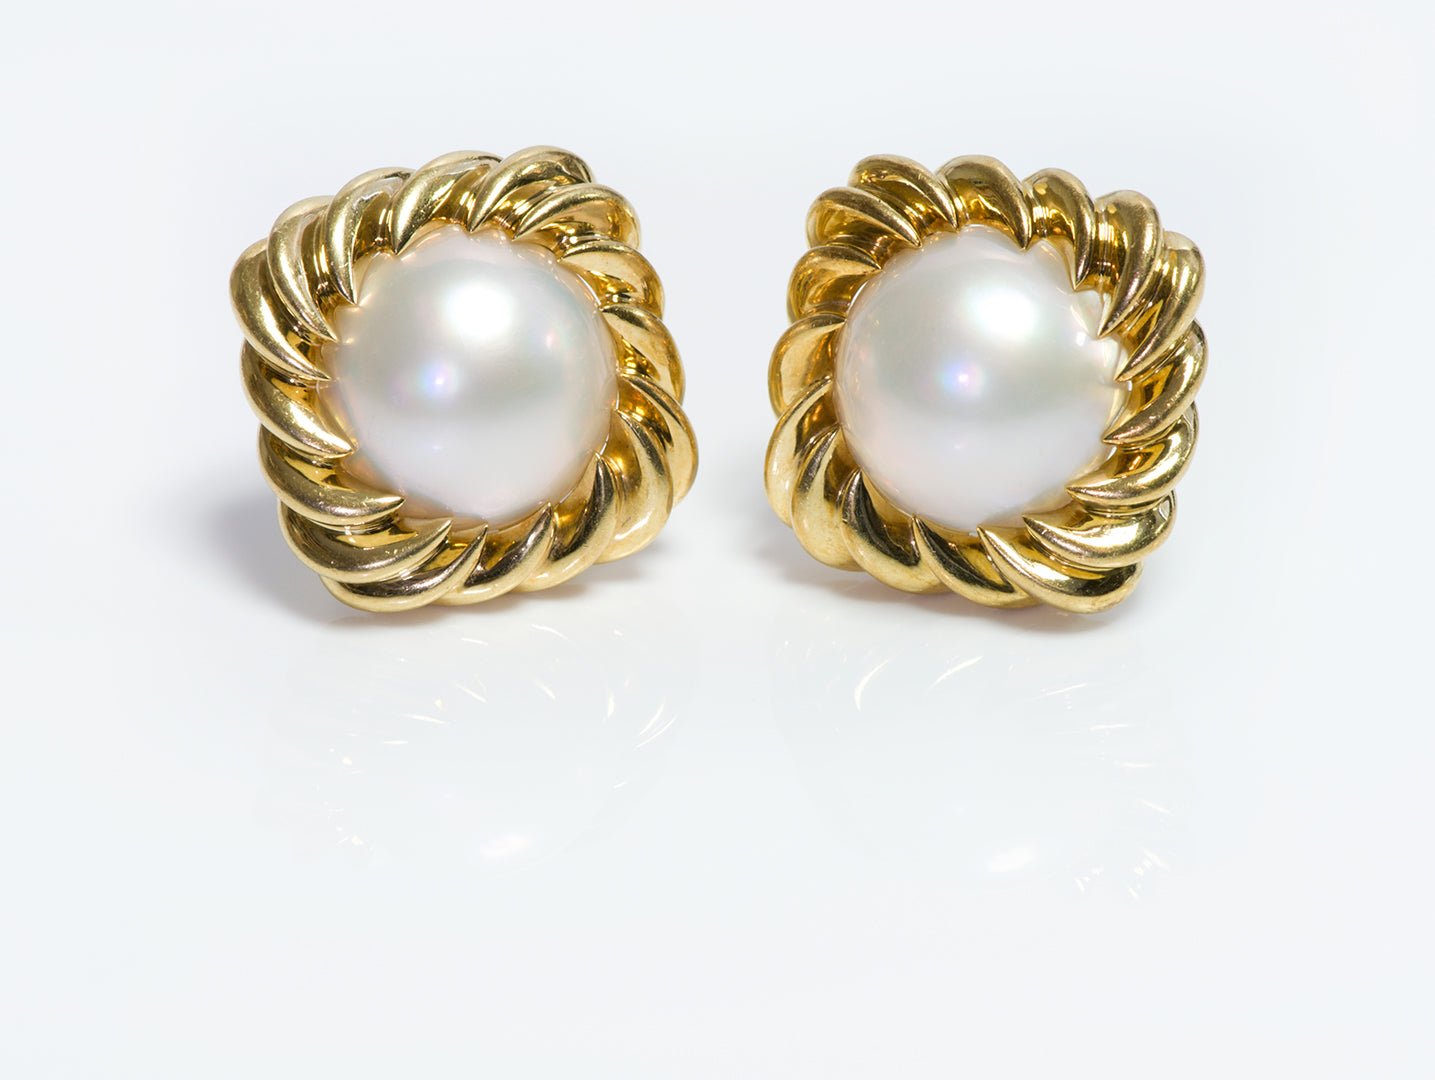 Vintage Tiffany & Co. 18K Gold Mabe Pearl Earrings